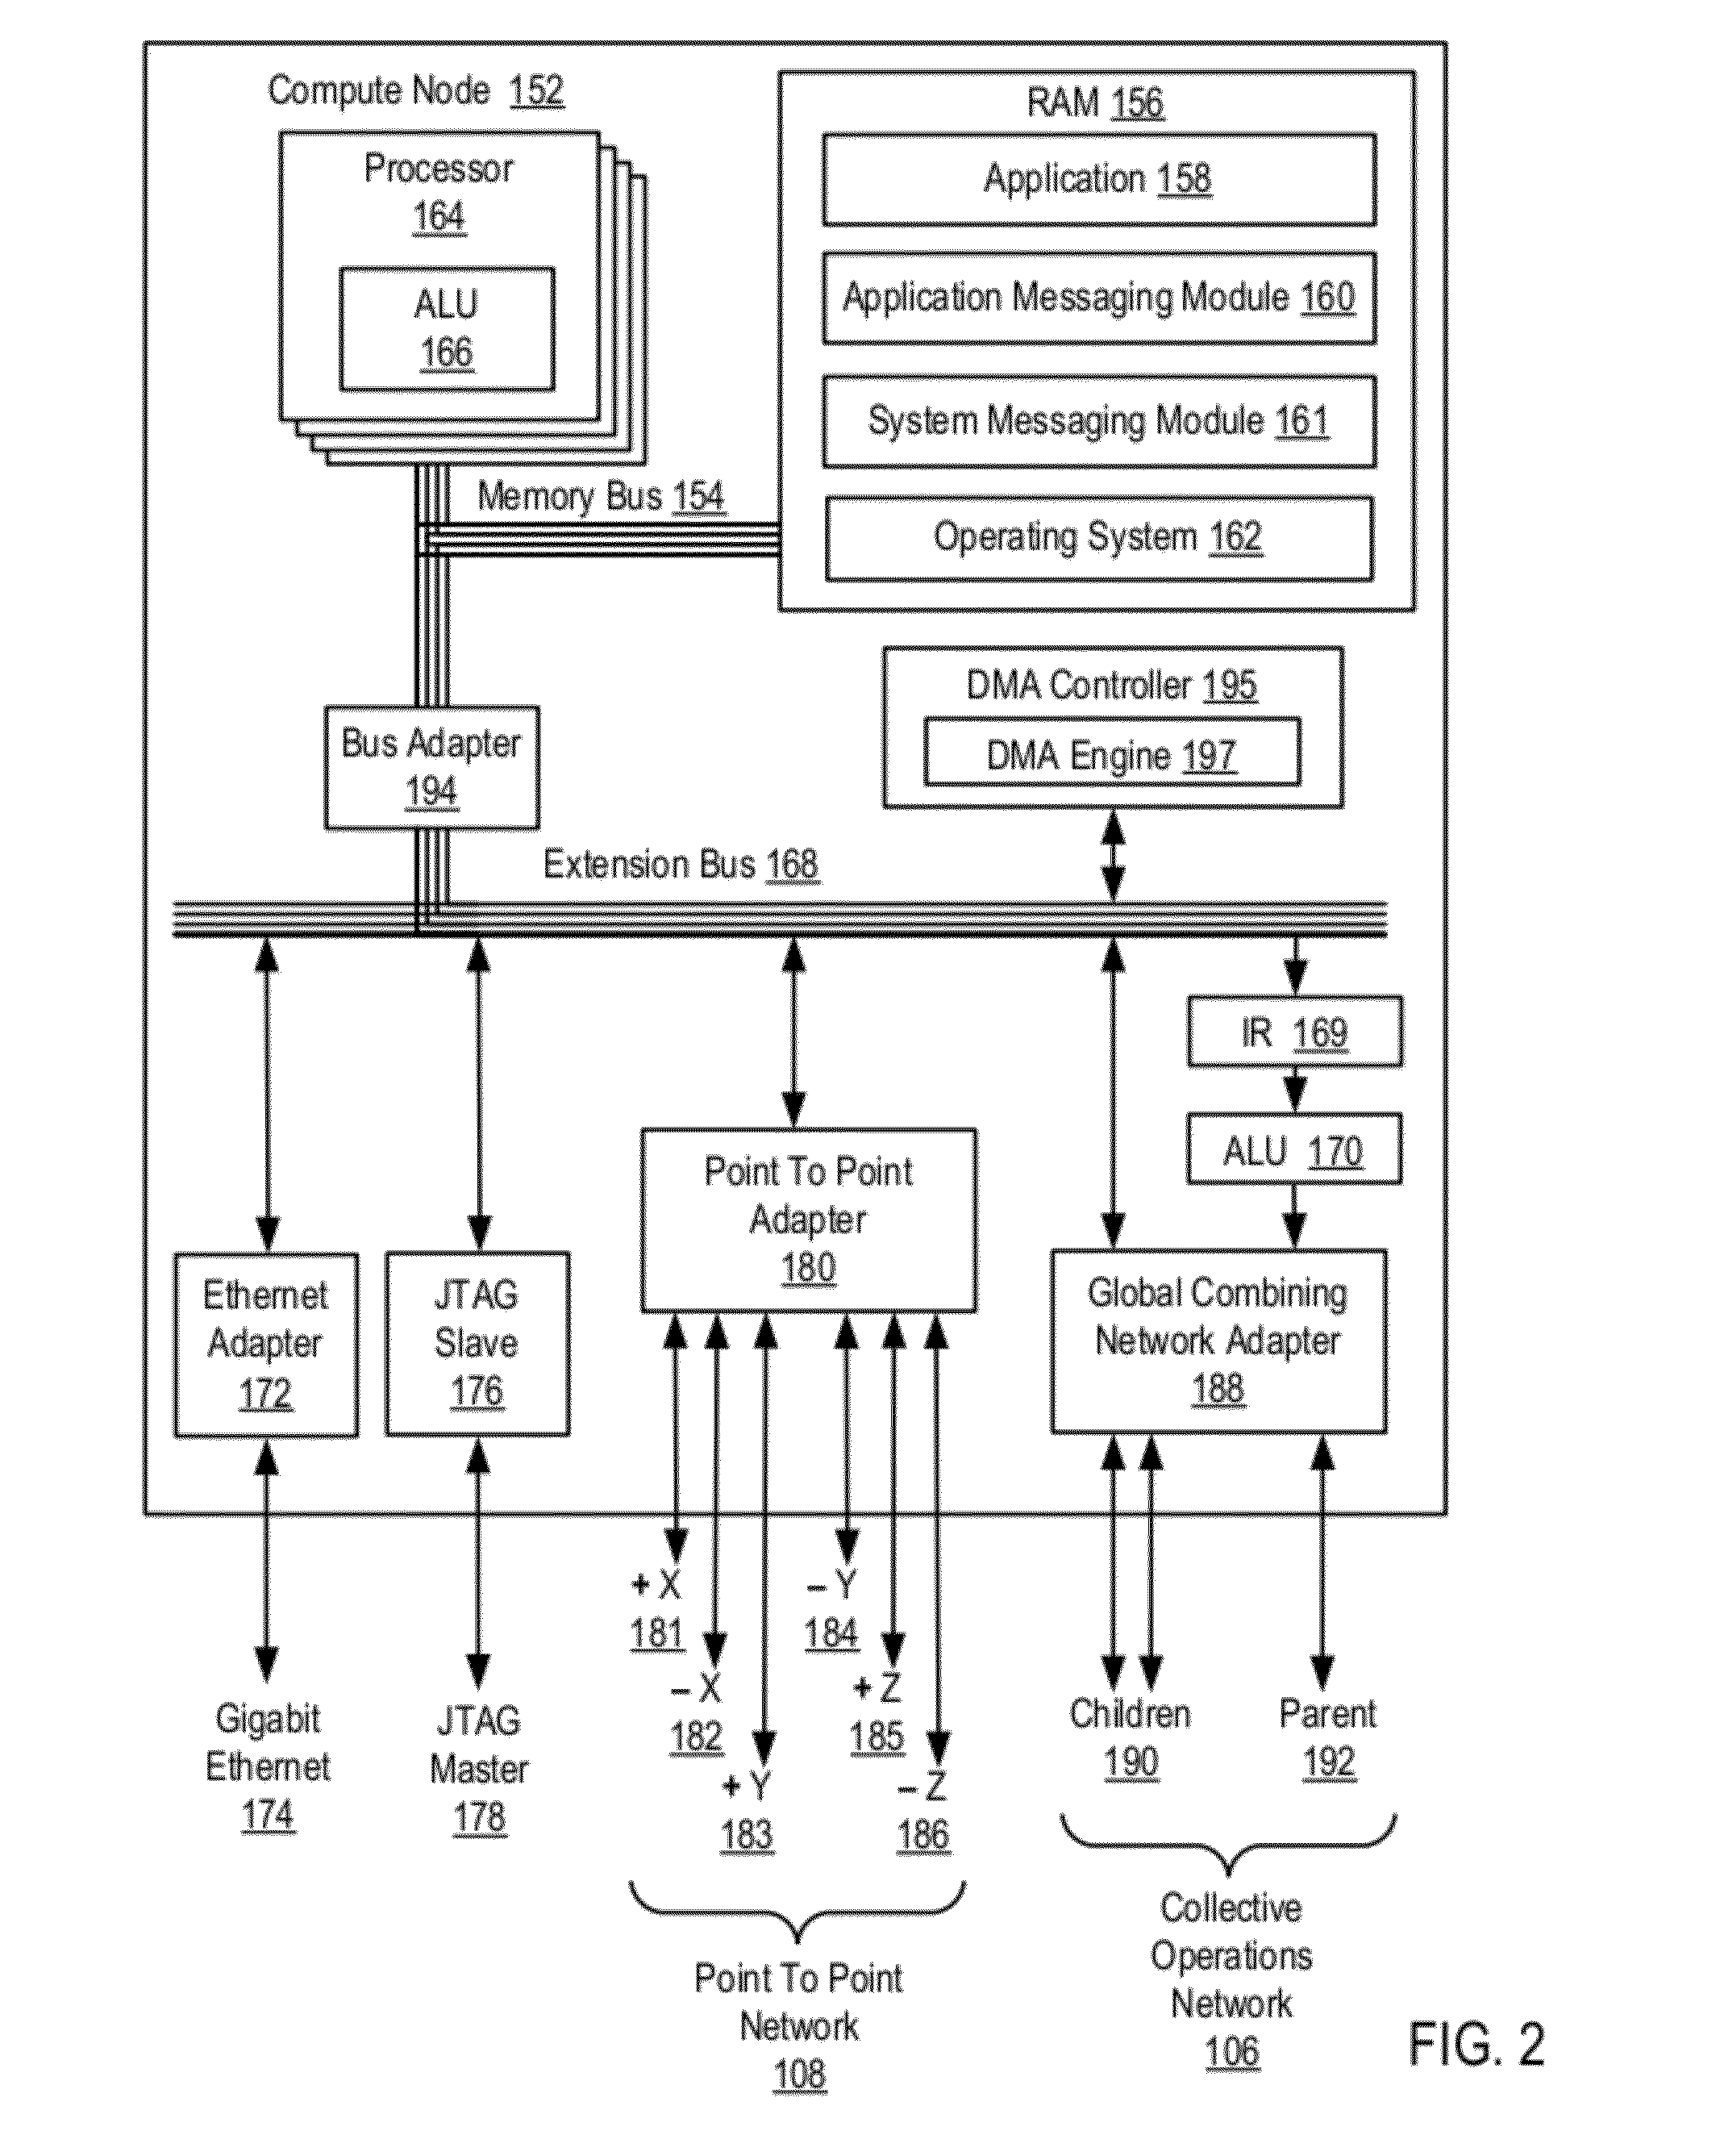 Administering An Epoch Initiated For Remote Memory Access